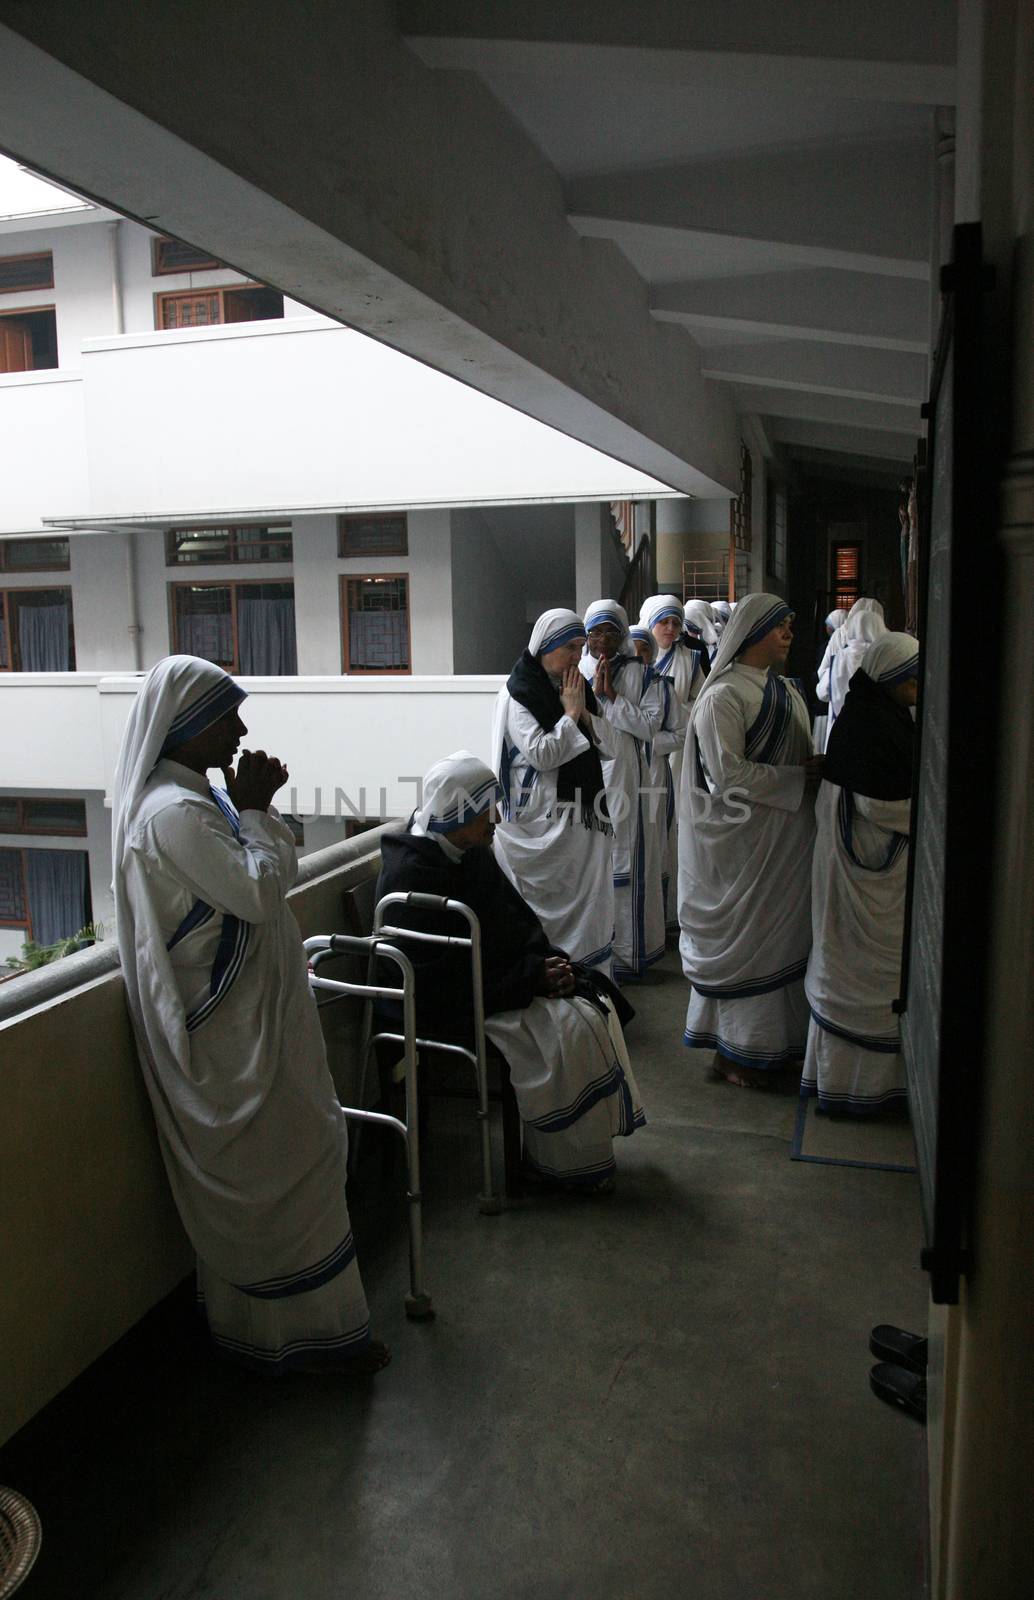 Sisters of The Missionaries of Charity of Mother Teresa at Mass in the chapel of the Mother House, Kolkata by atlas